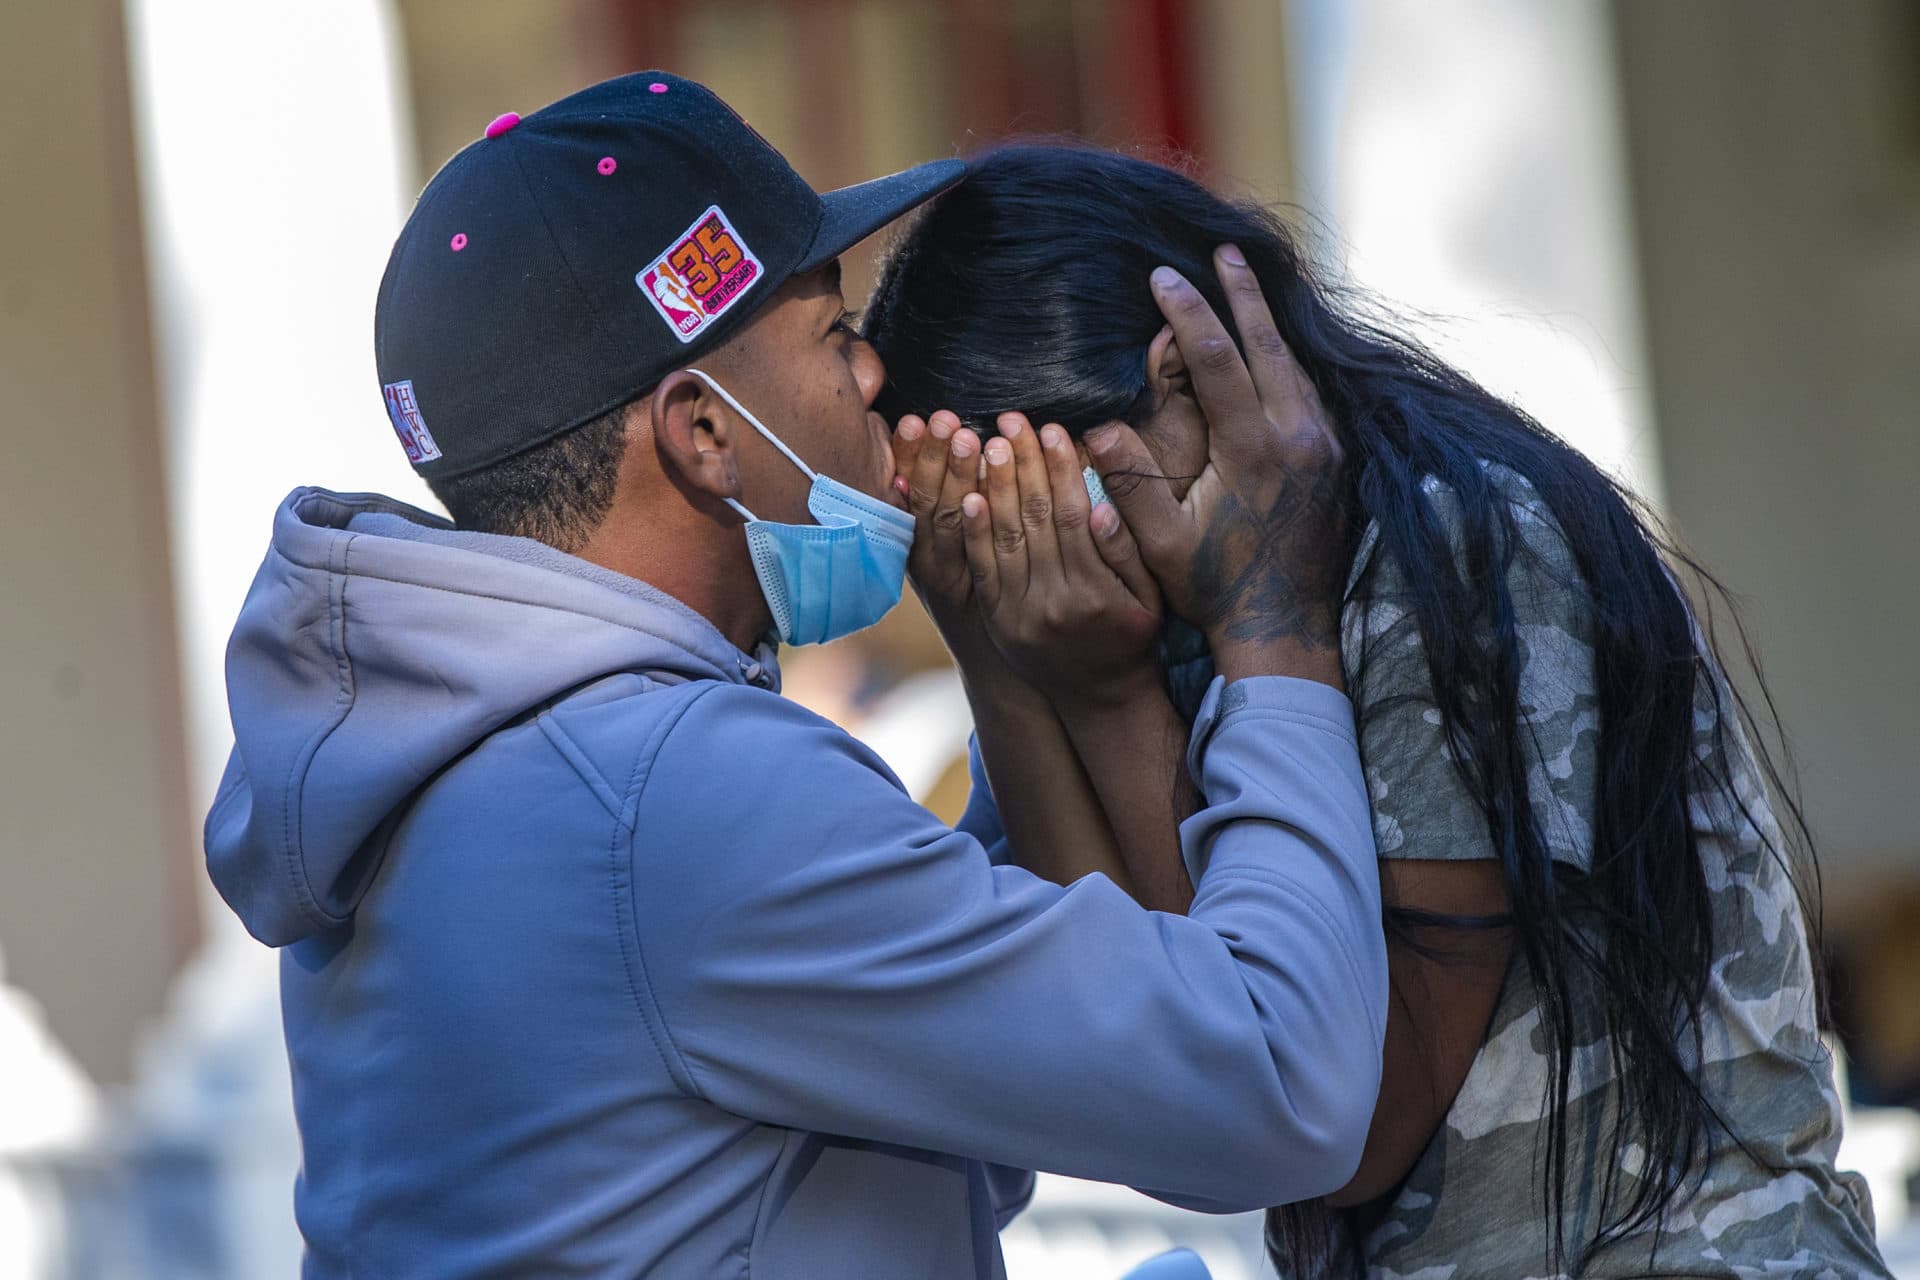 A young migrant couple embraces on the porch of St. Andrew’s Parish House in Edgartown. (Jesse Costa/WBUR)